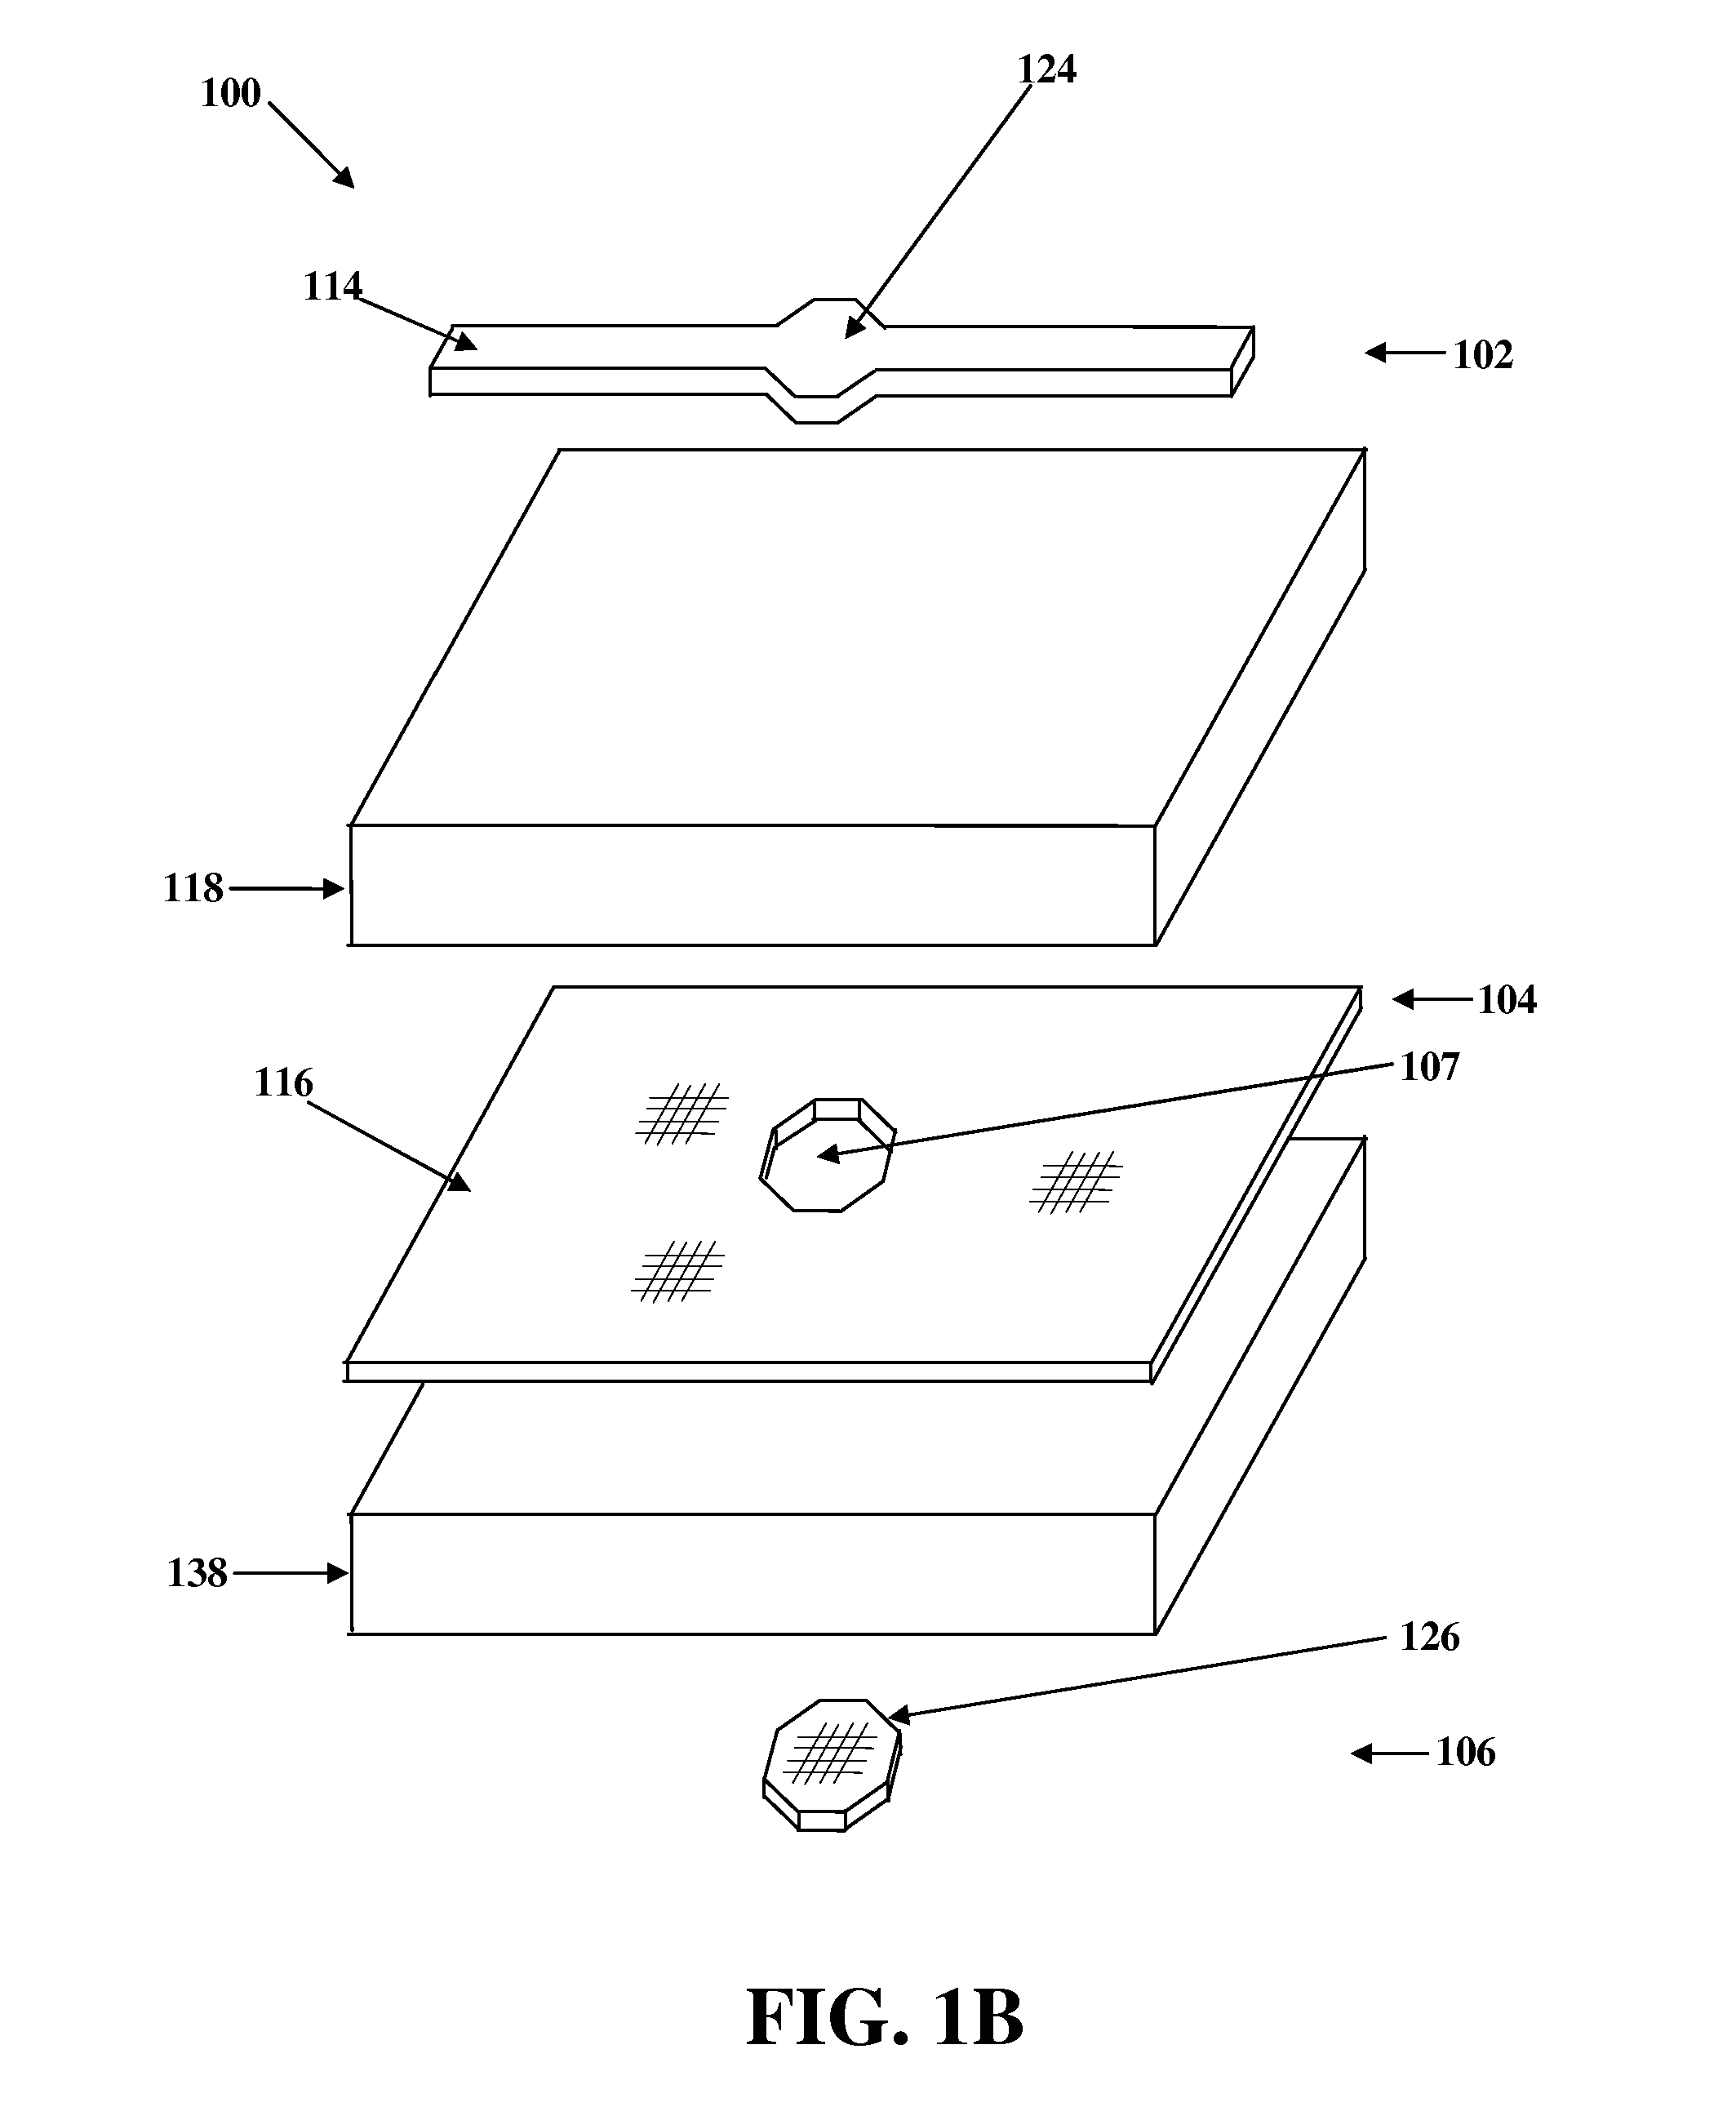 Circuit Board Pad Having Impedance Matched to a Transmission Line and Method for Providing Same